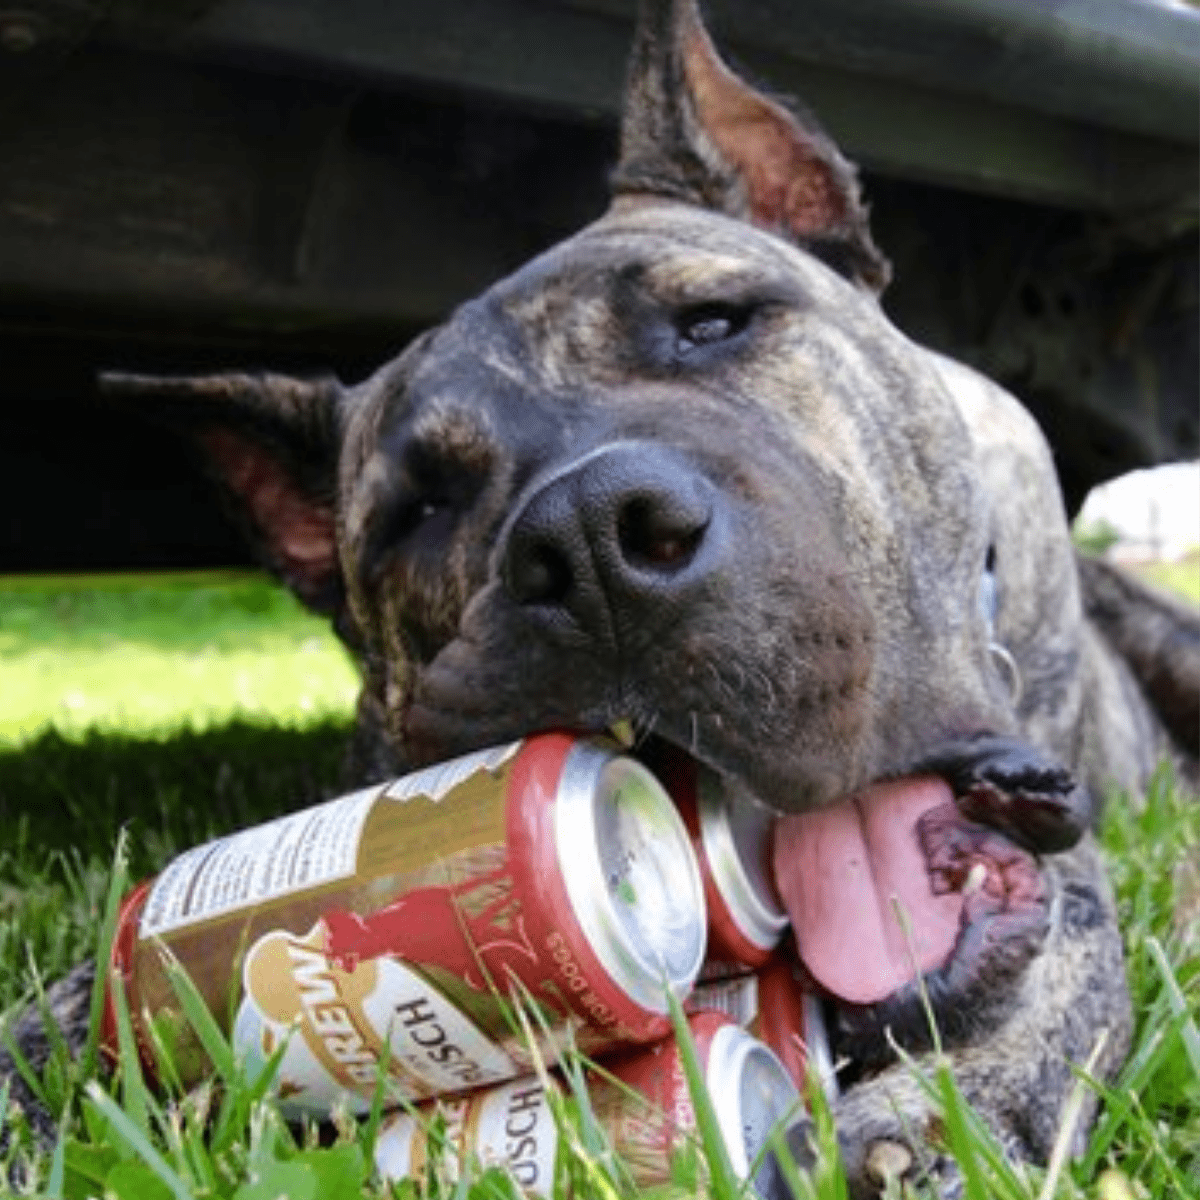 A brindle large dog with a pack of Busch beer lying in the grass chewing on the cans.